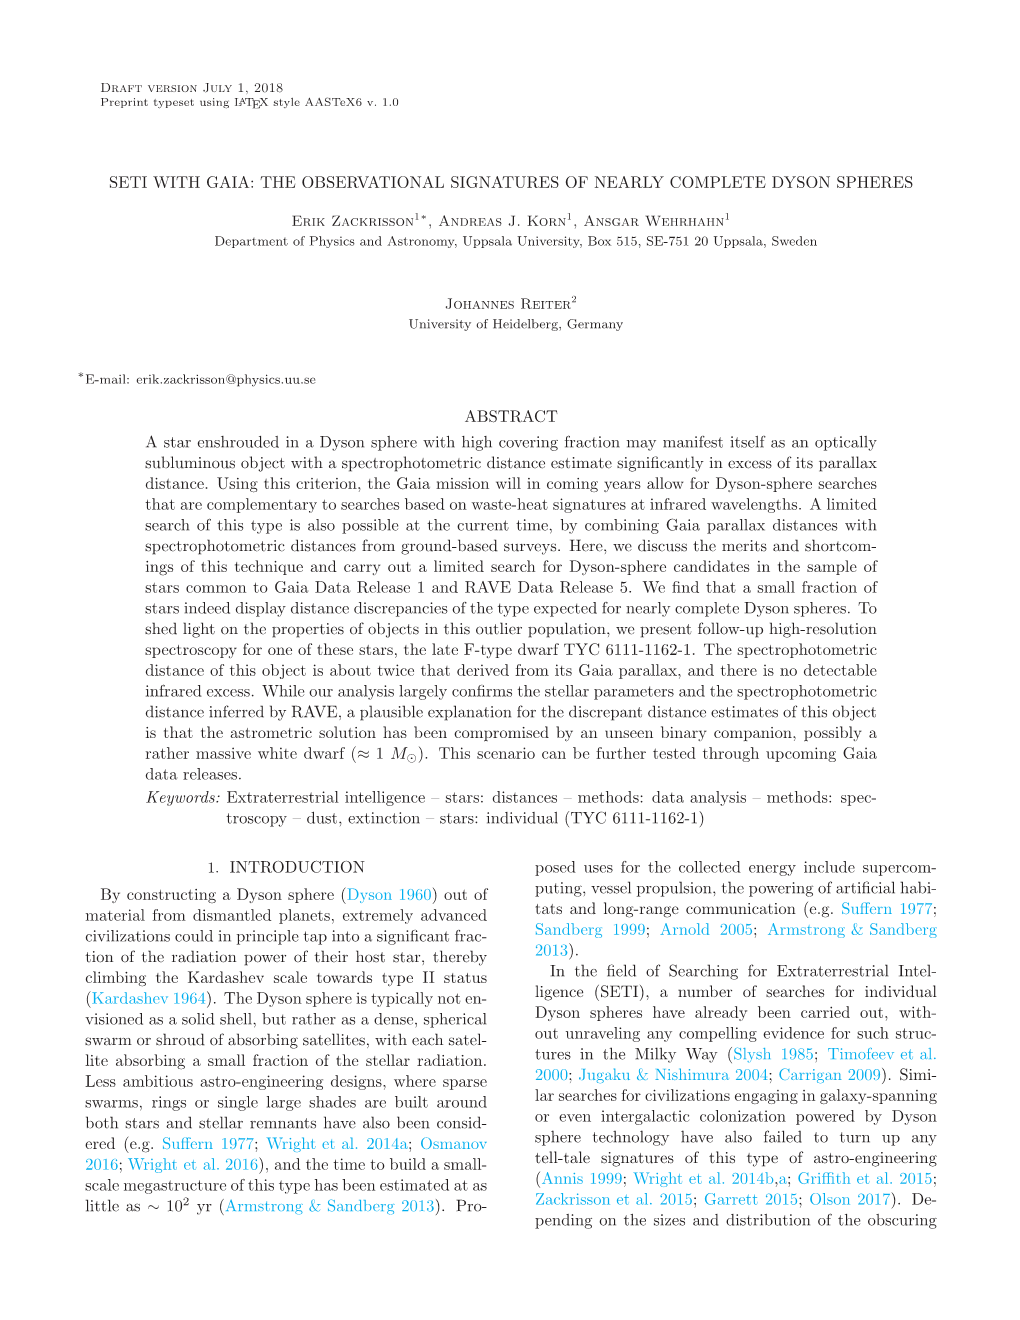 The Observational Signatures of Nearly Complete Dyson Spheres